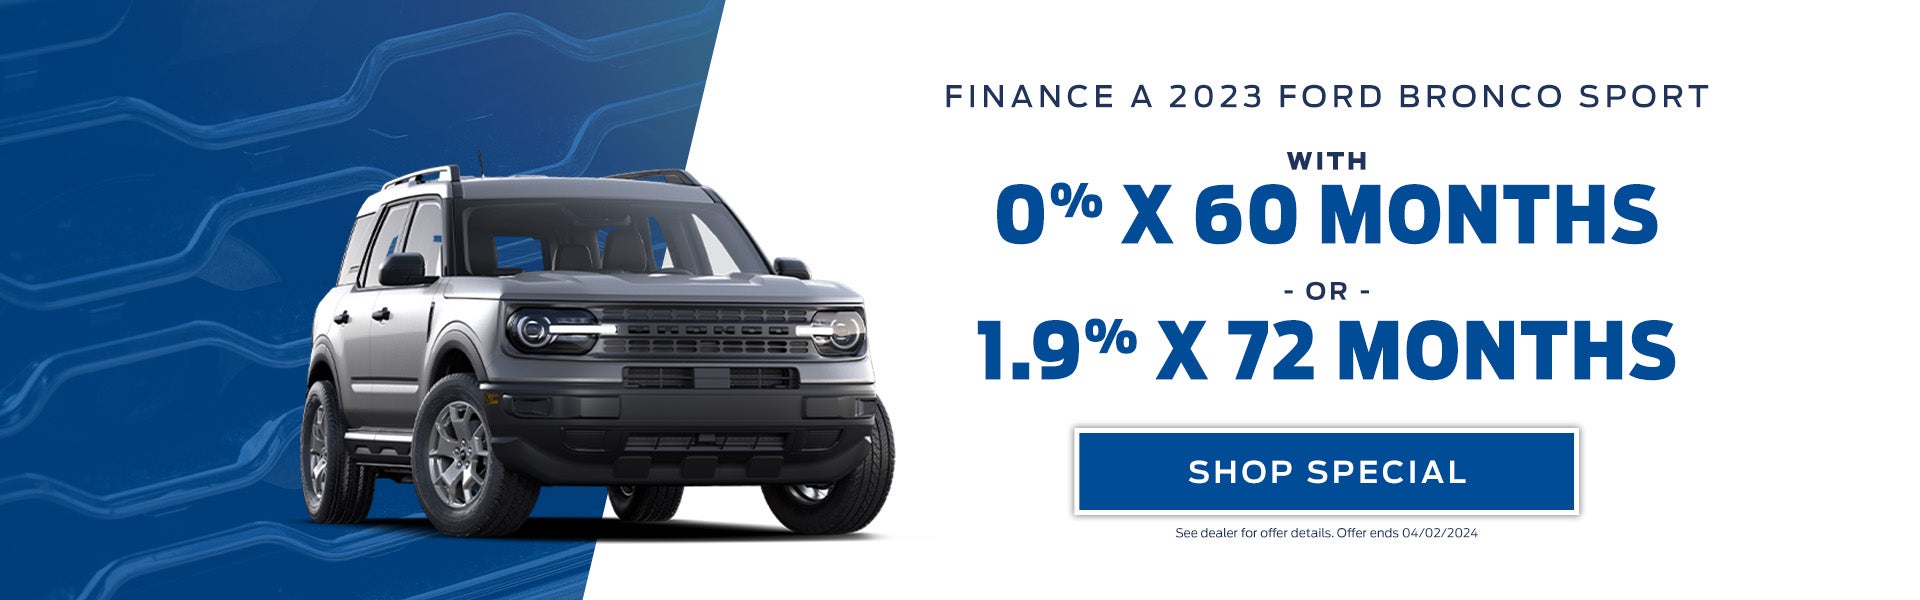 Finance a 2023 Ford Bronco Sport with 0% X 60 Months OR 1.9%